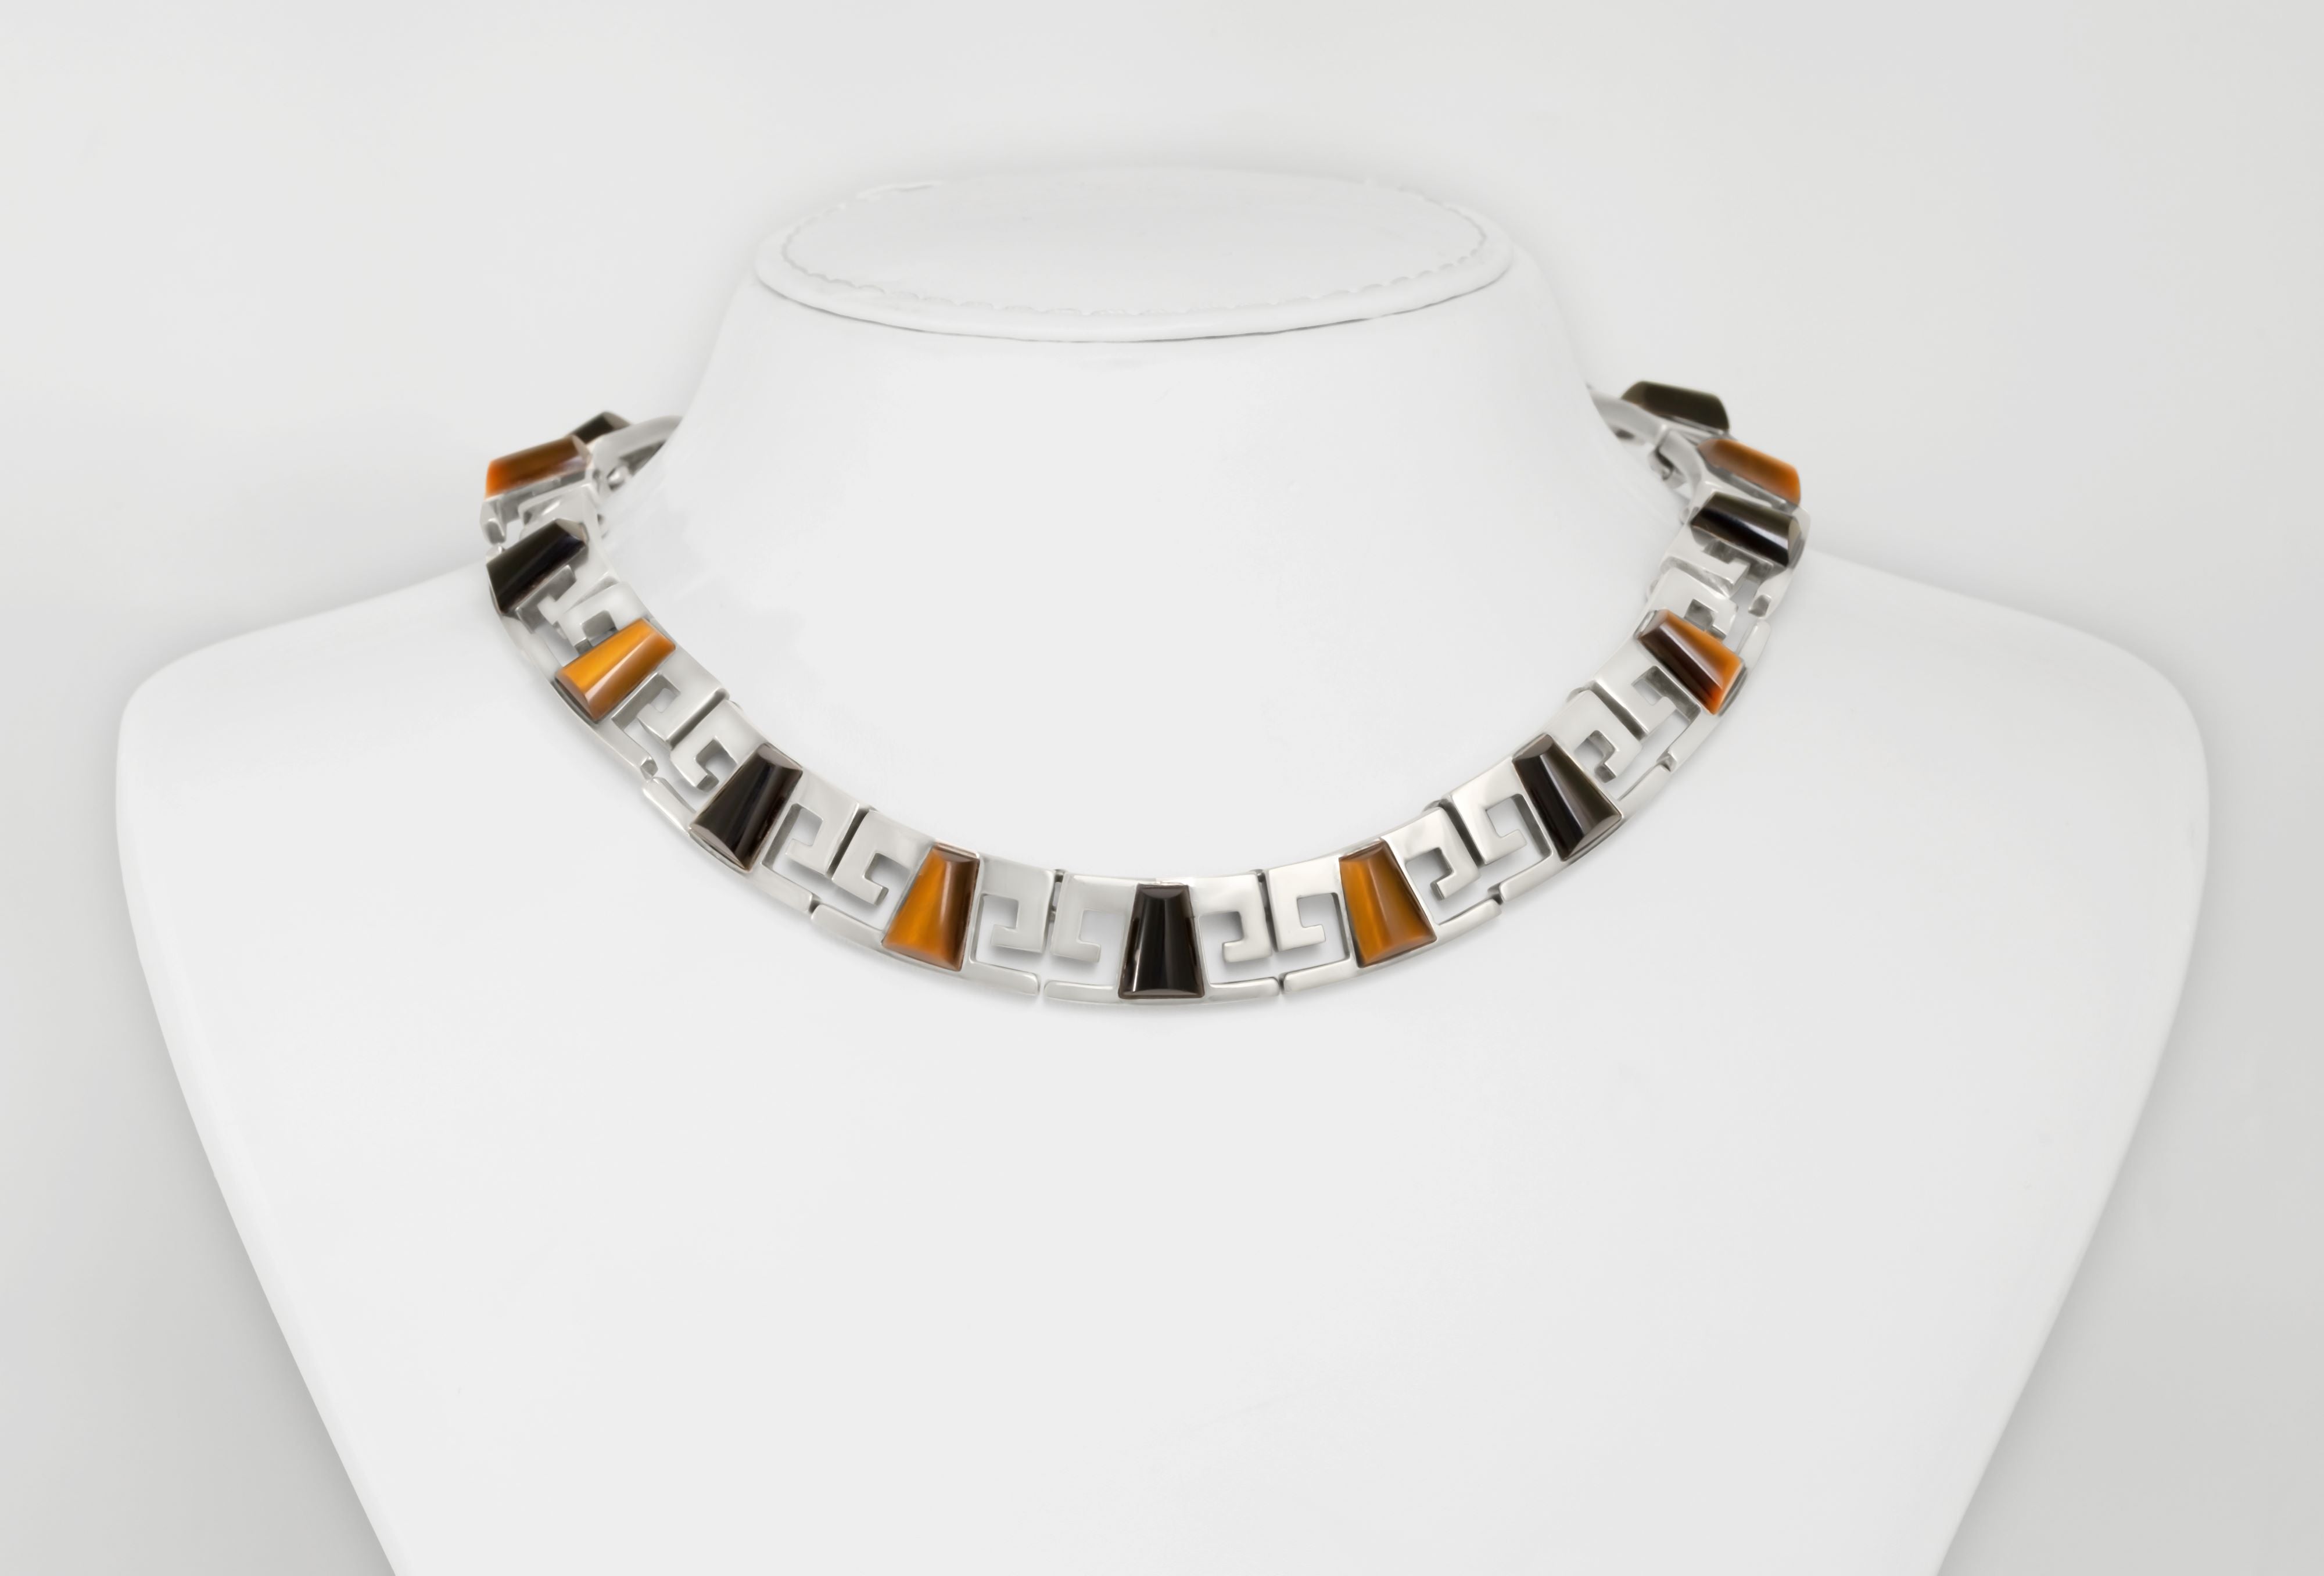 Collar-style onyx and tiger eye necklace from the 1980s-1990s.